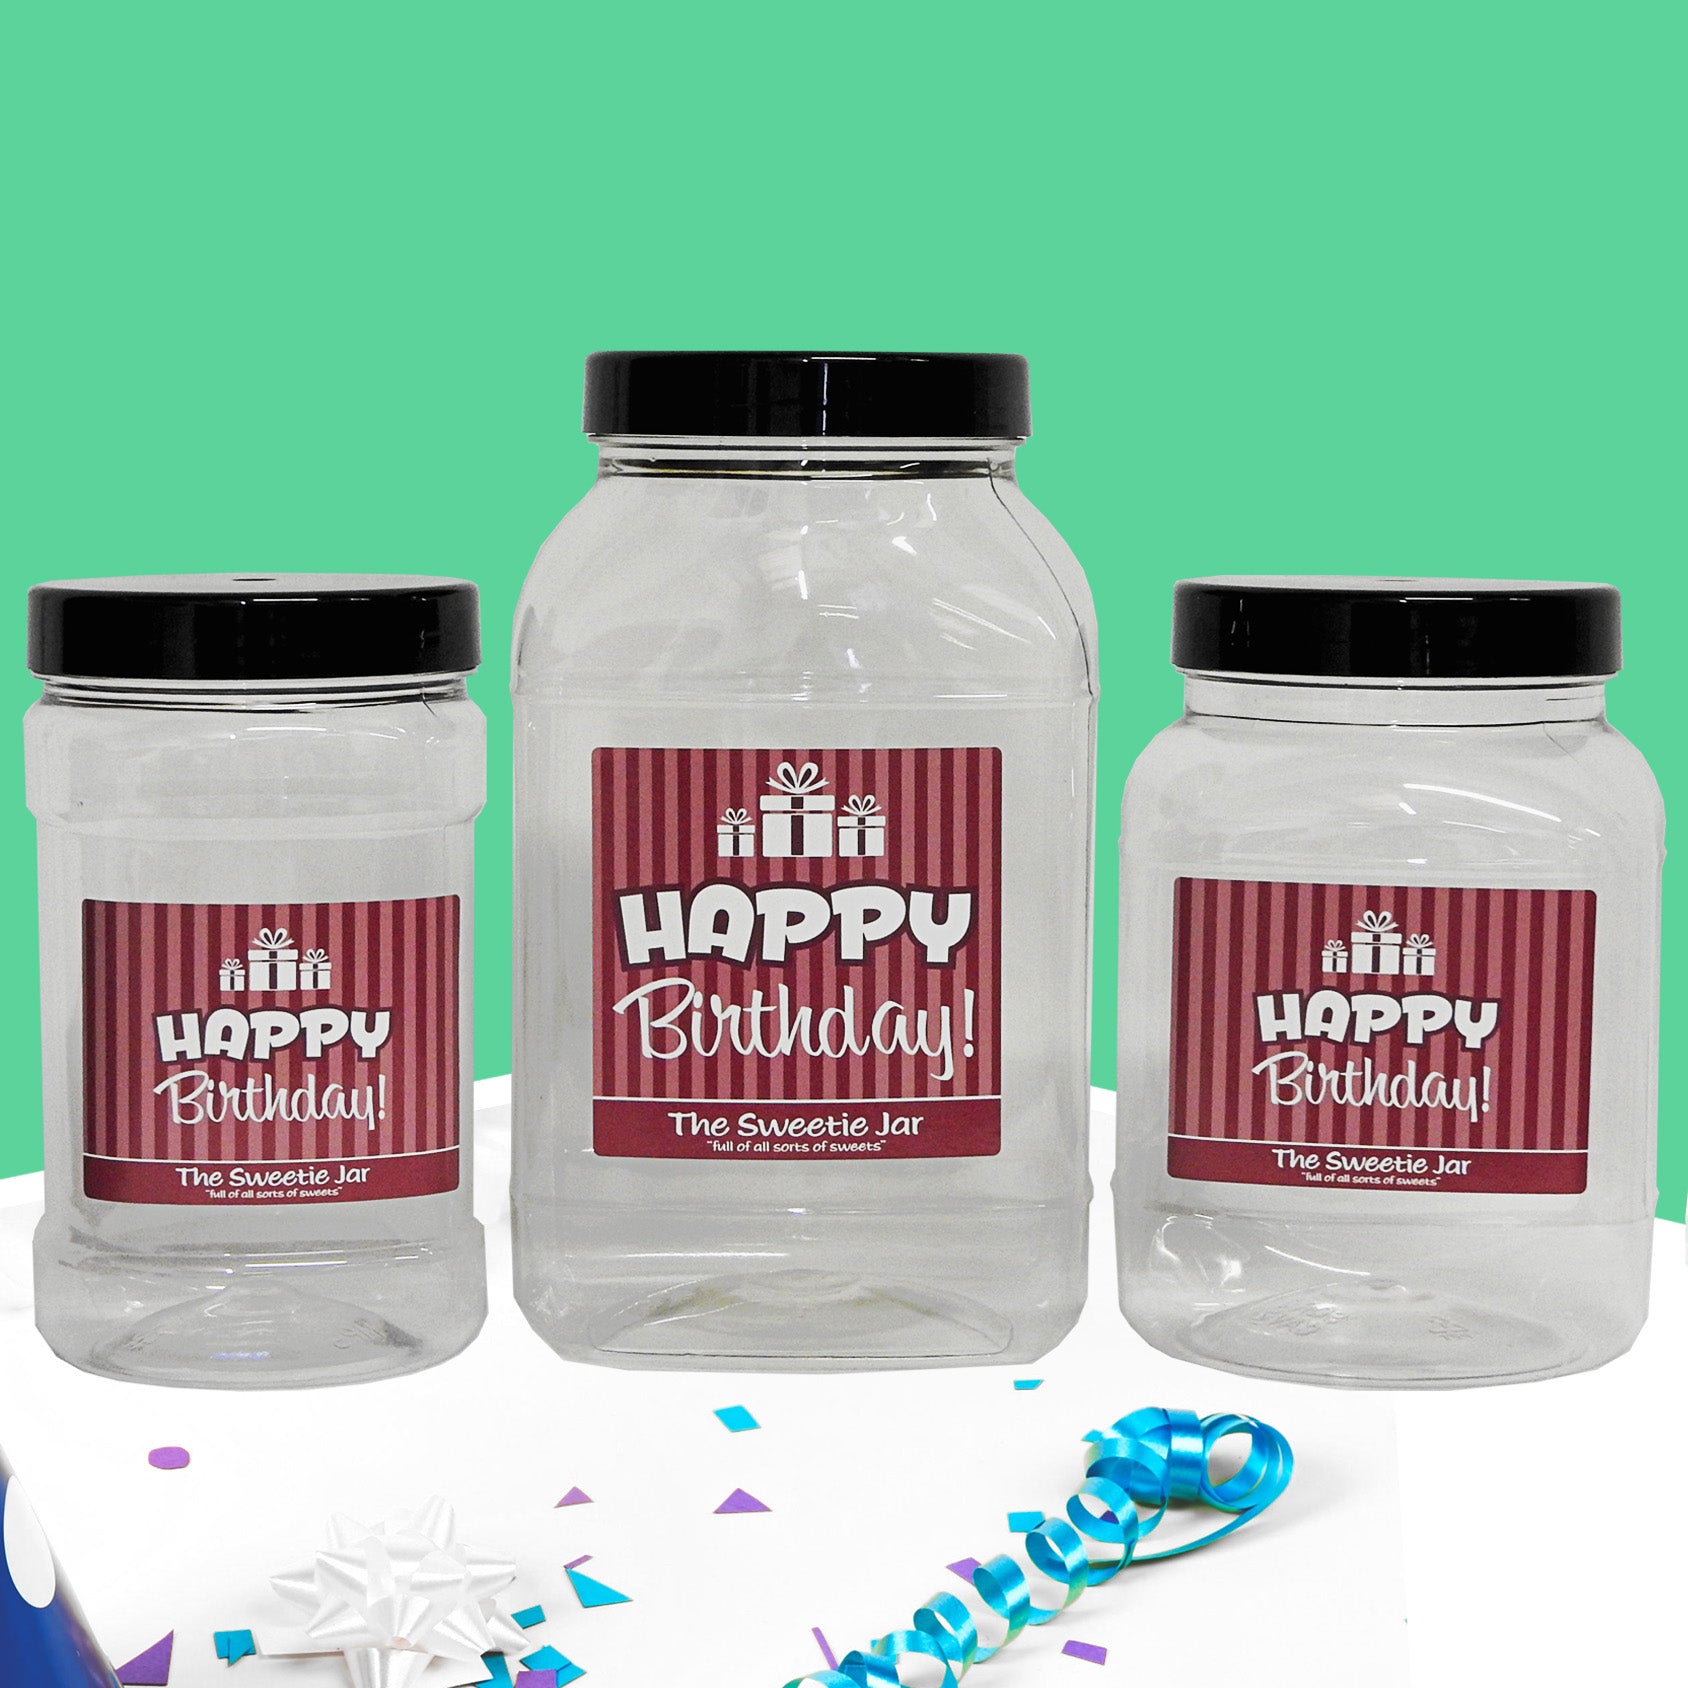 Create Your Own Birthday Gift Jar of Sweets